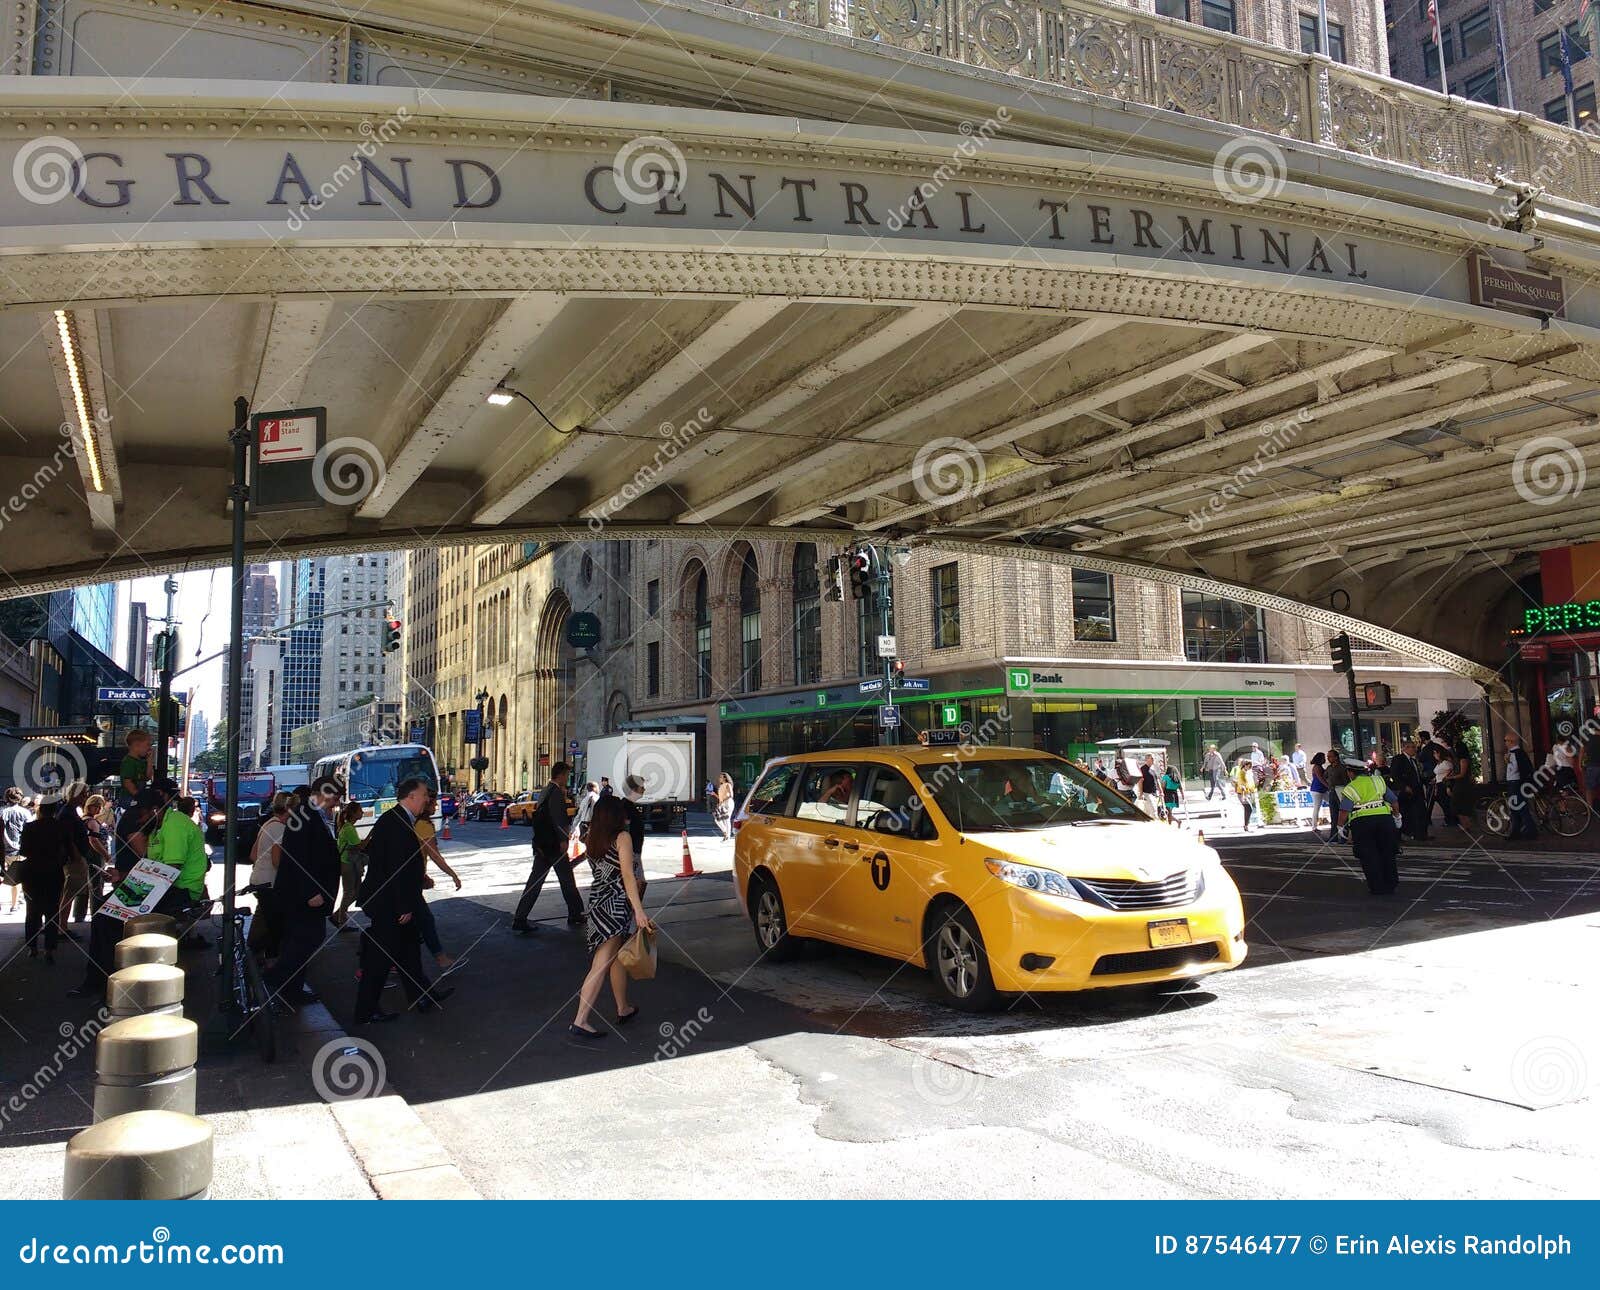 Grand Central Terminal Grand Central Station Park Avenue Viaduct Pershing Square Viaduct New York City Nyc Ny Usa Editorial Photography Image Of Commuters City 87546477